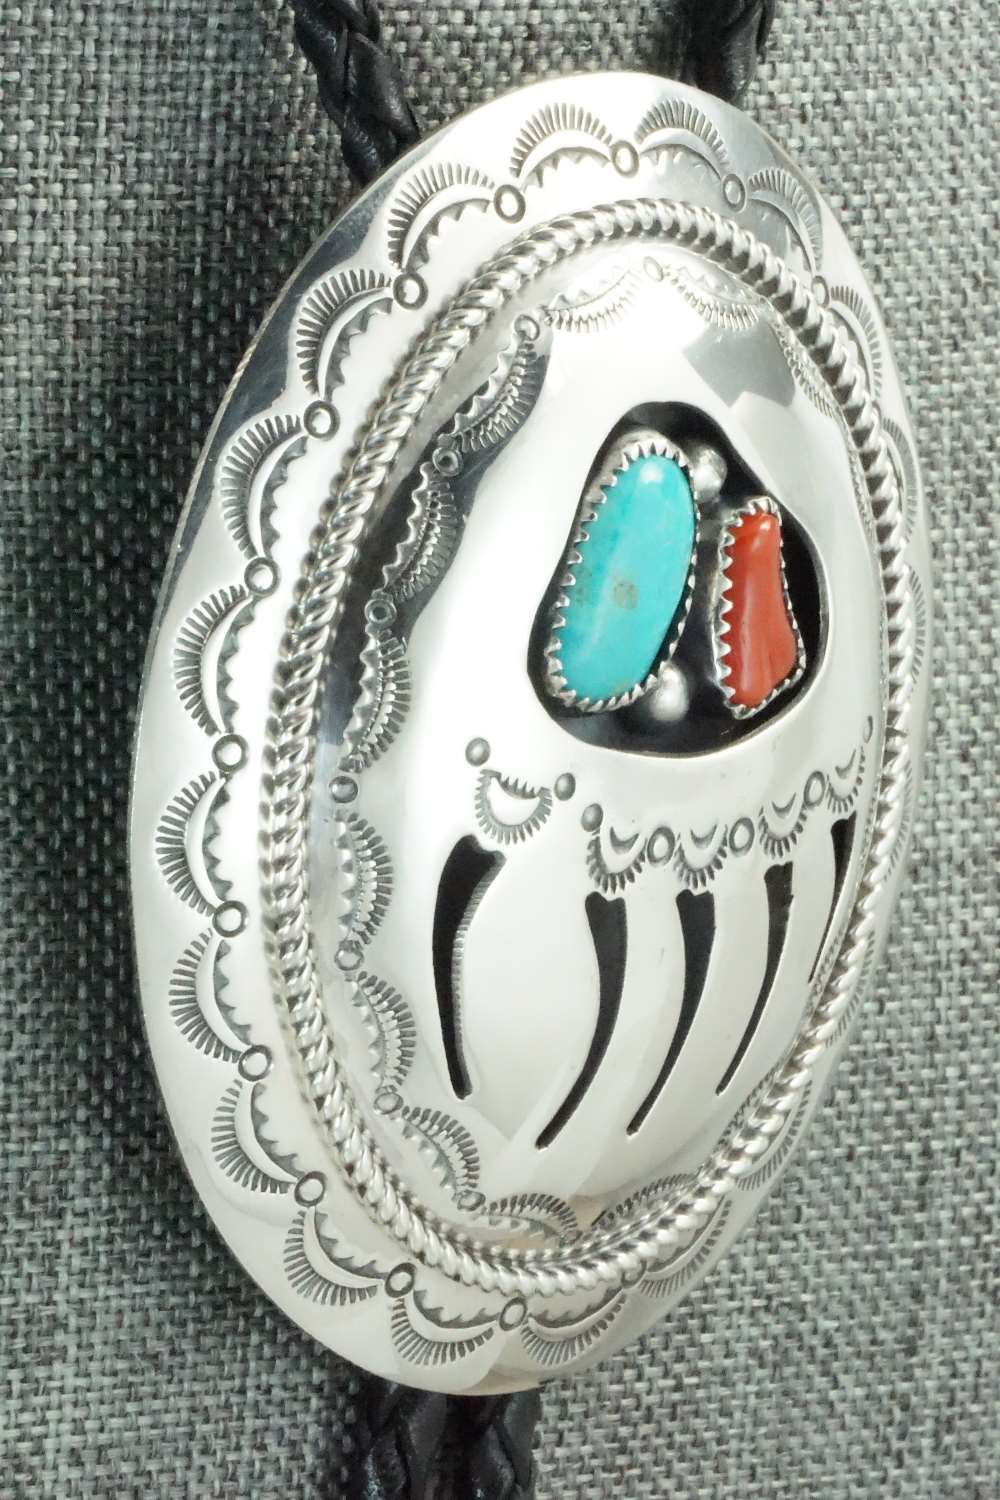 Turquoise, Coral & Sterling Silver Bolo Tie - Wilbert Muskett Sr.